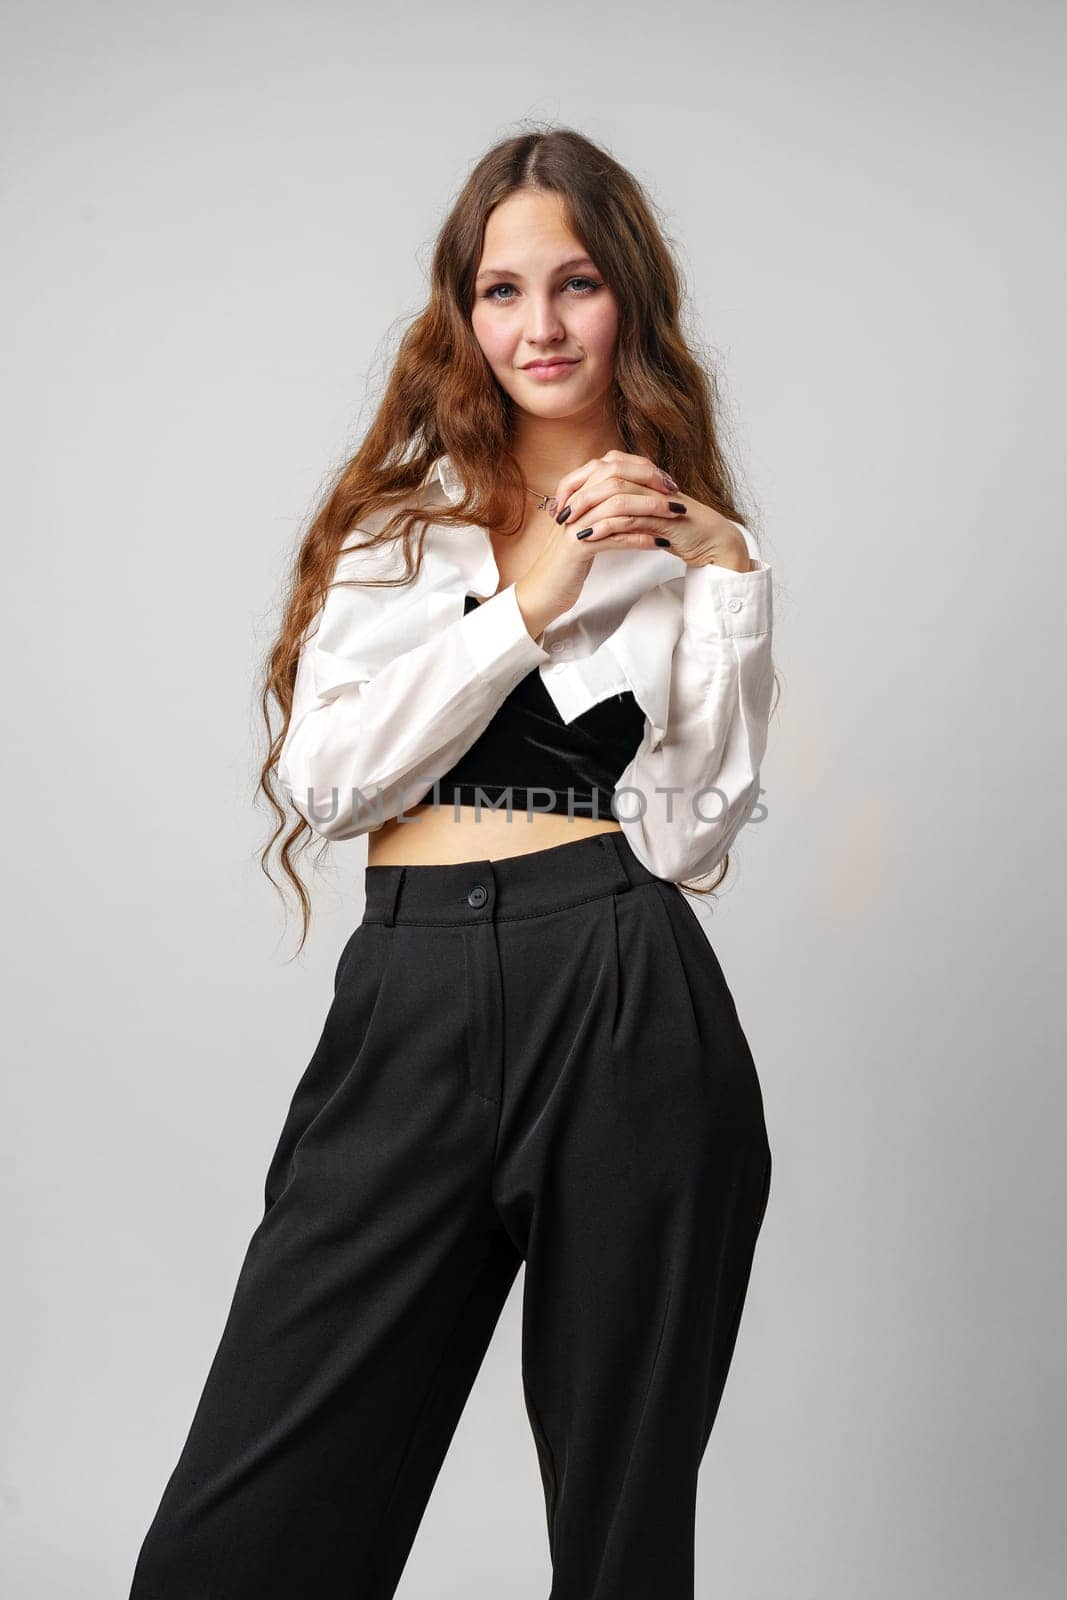 Confident Young Woman Posing in Casual Black and White Outfit Against Grey Background by Fabrikasimf